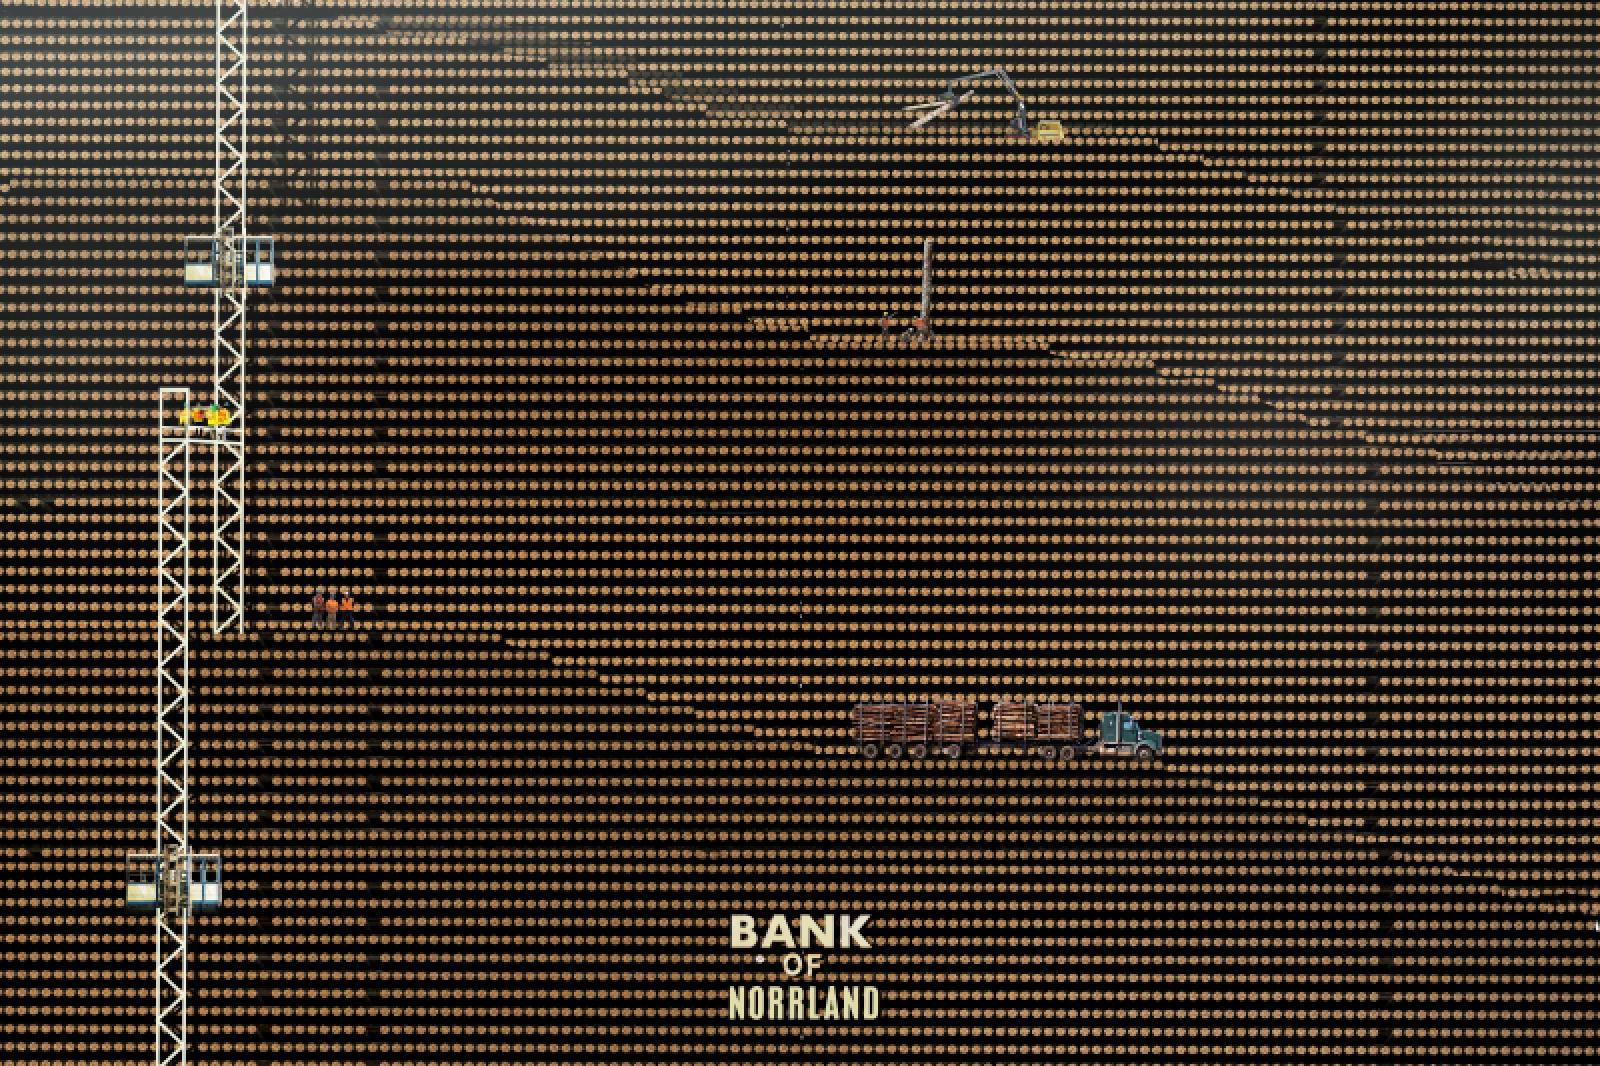 Bank of Norrland